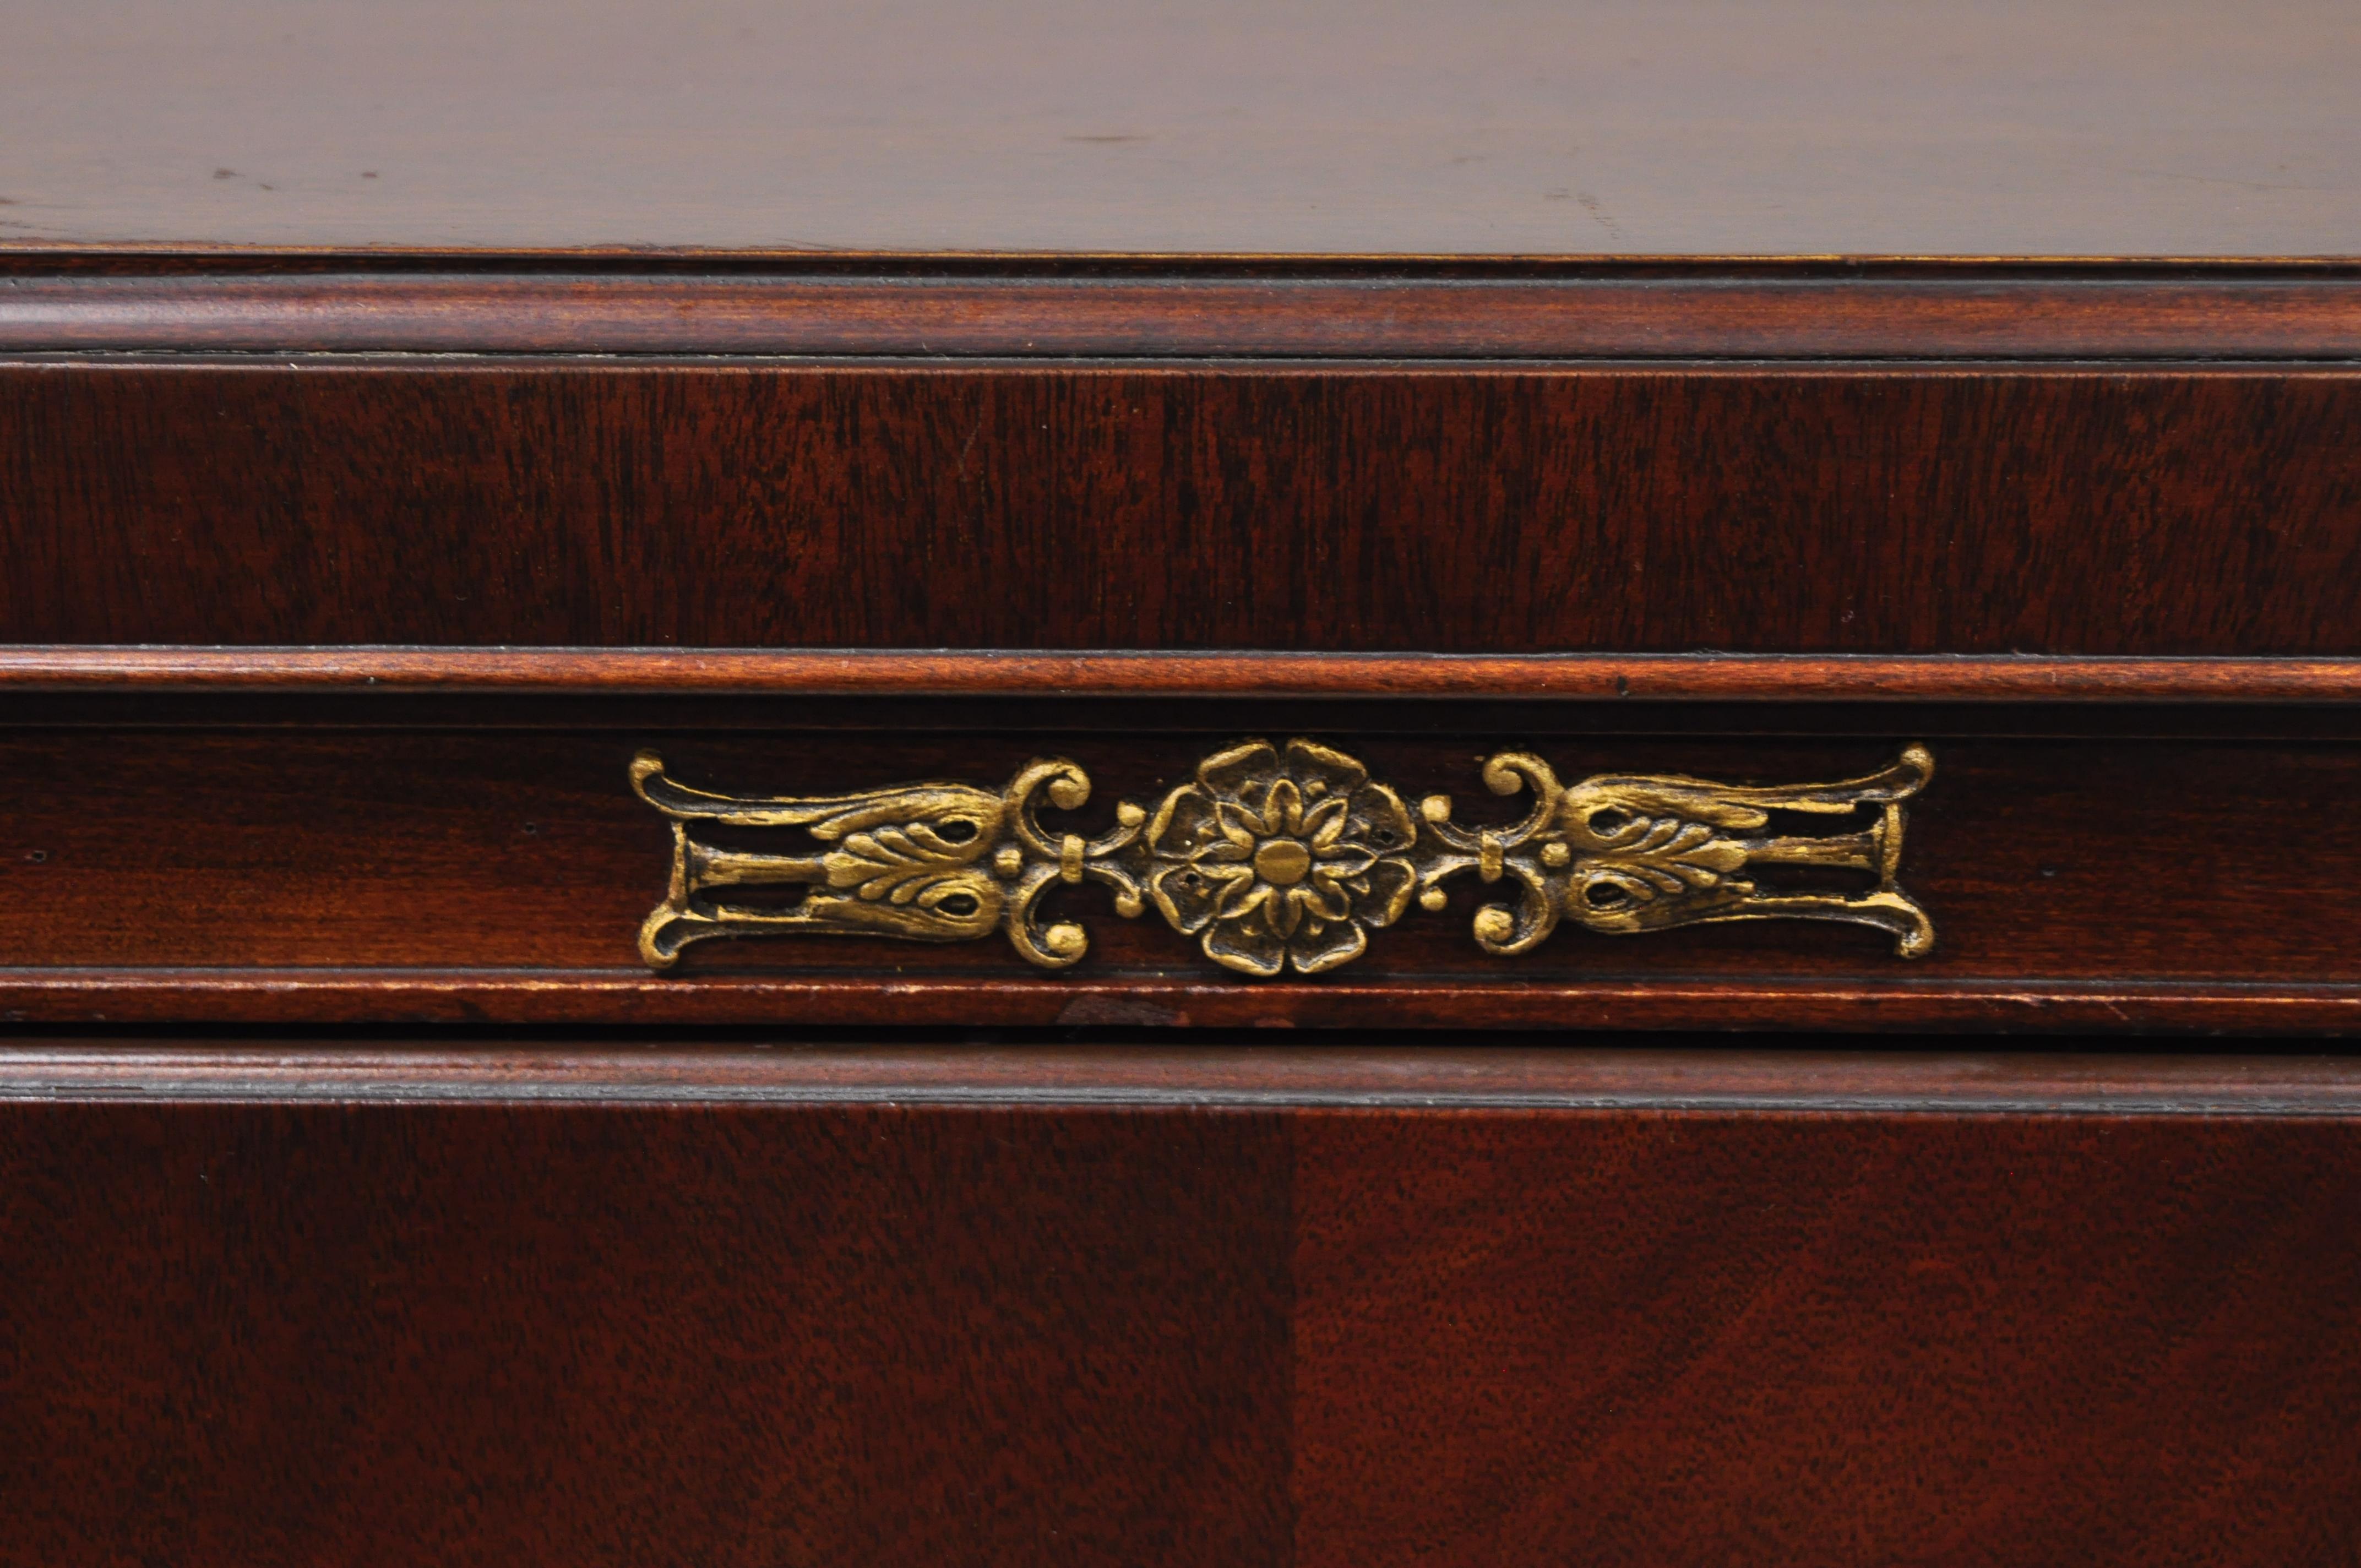 North American Vintage Mahogany Regency Style Carved Paw Feet Tall Chest Dresser by White Furn